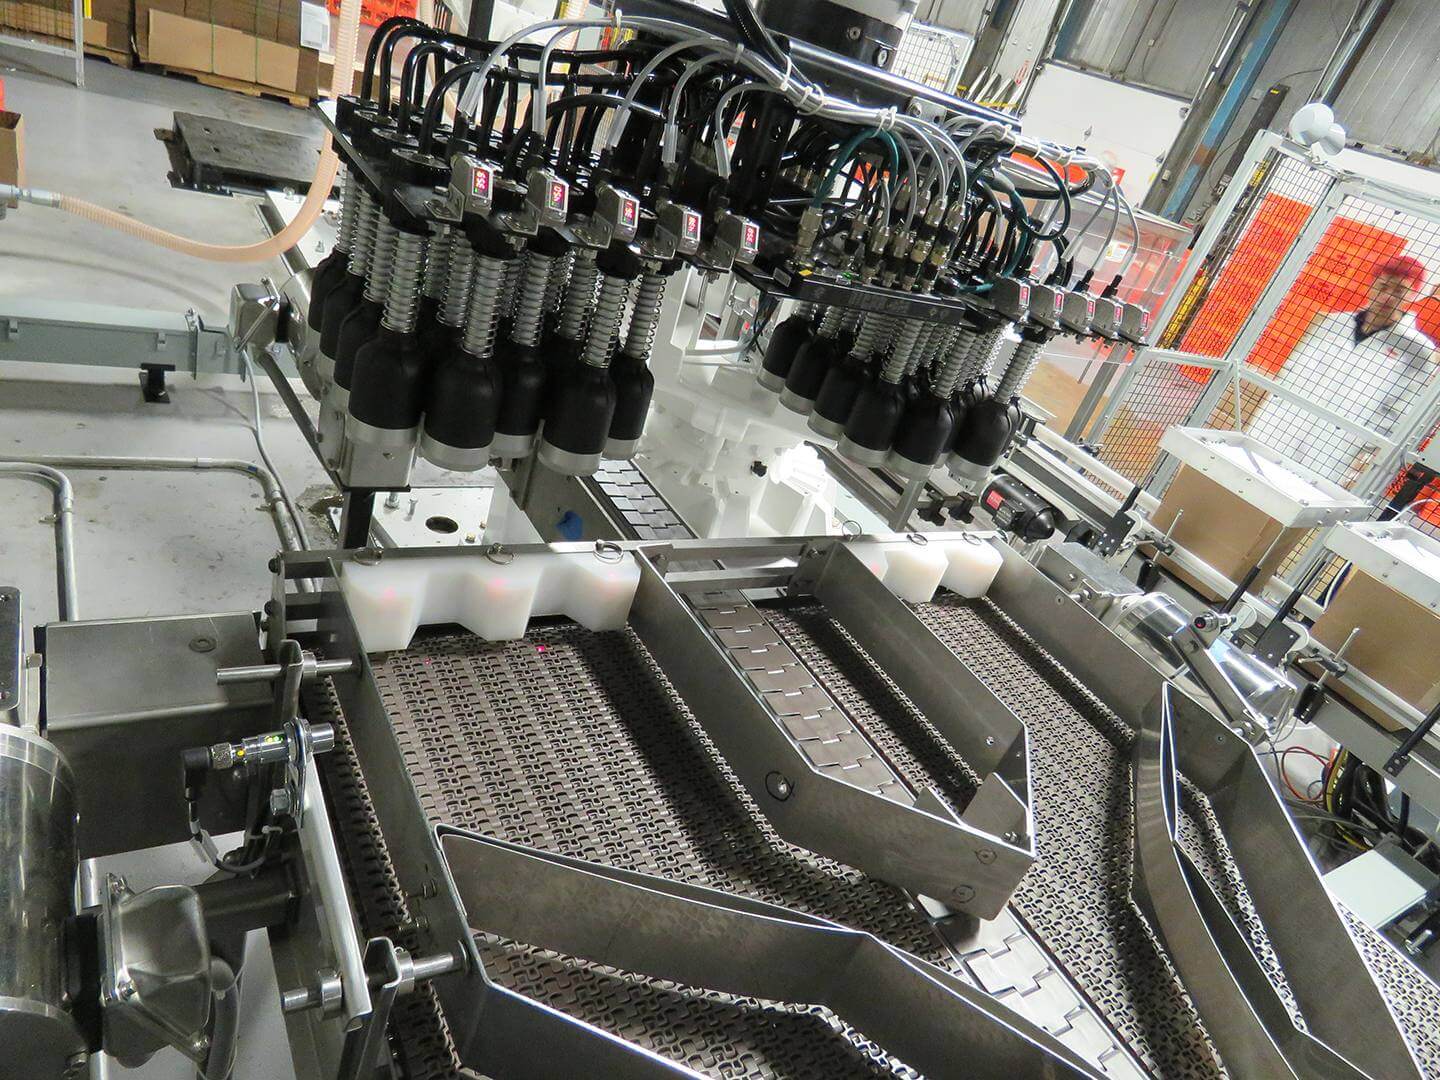 Case packing system in operation